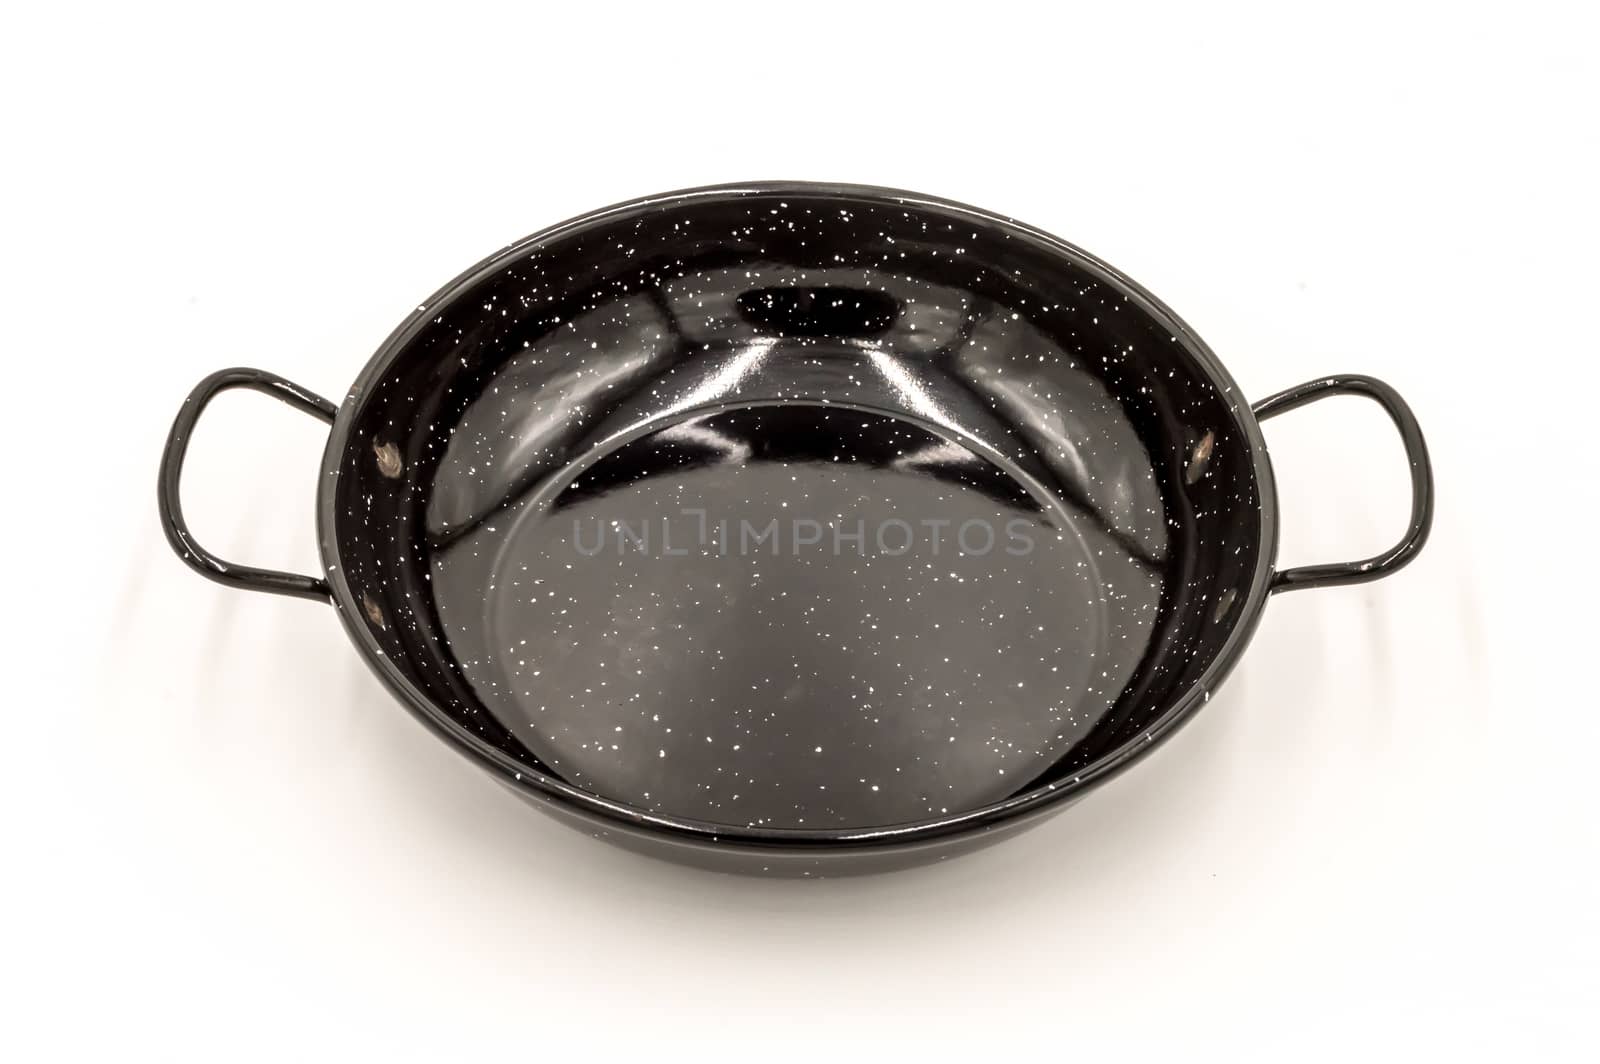 Empty paella pan on a white background, ready to cook